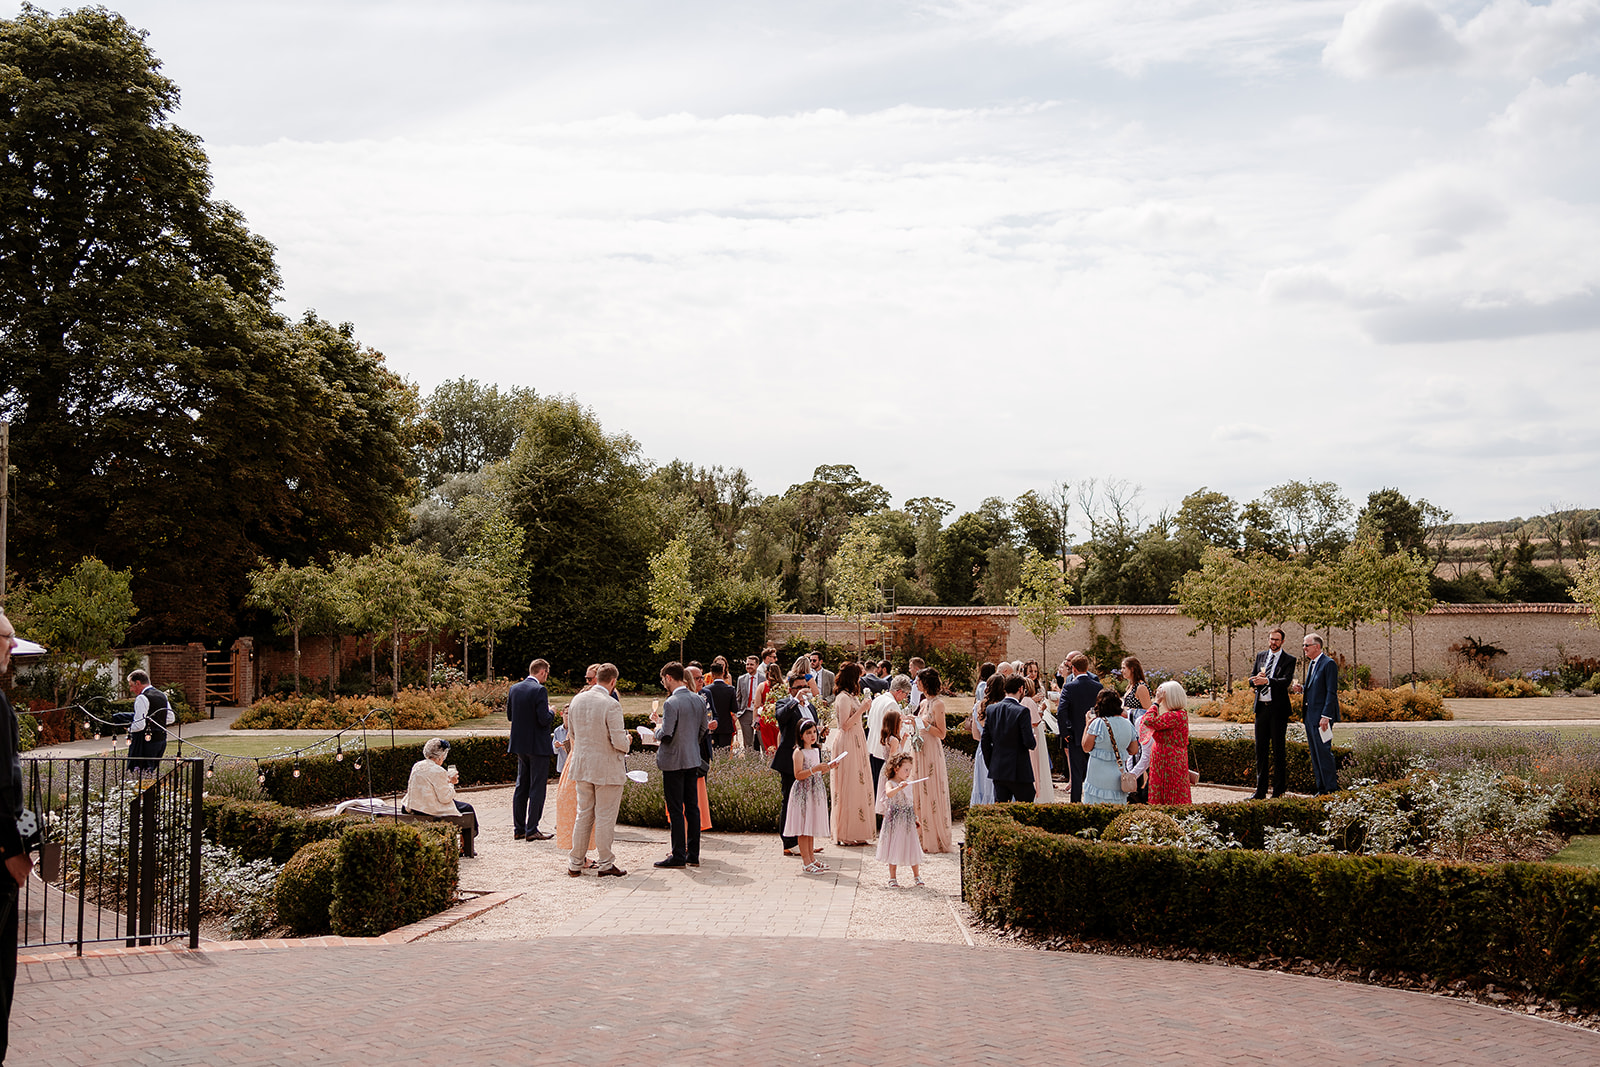 Guests enjoy games in the sunny Walled Garden at this summer Syrencot wedding.